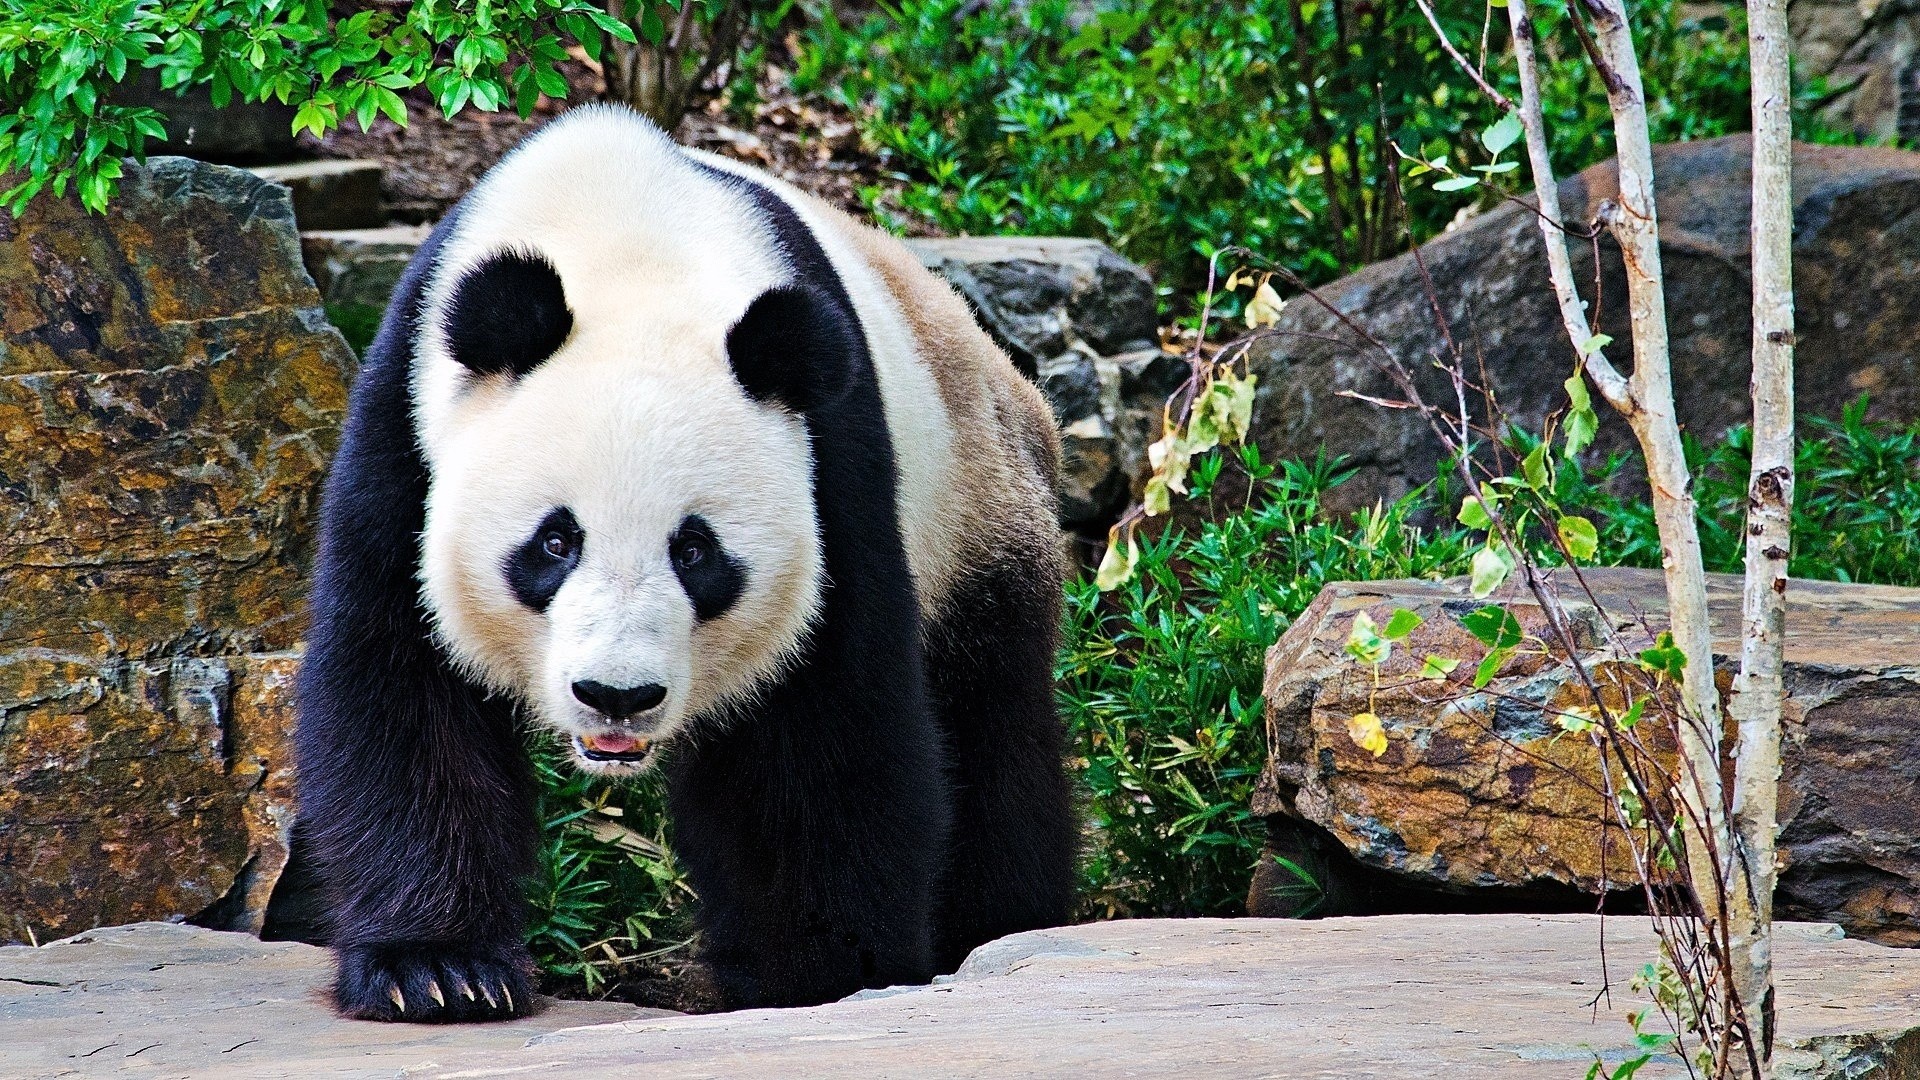 1920x1080 Take a look into this collection of Best Panda Wallpaper For Your Desktop  which can give your desktop a nature and wildlife feel.